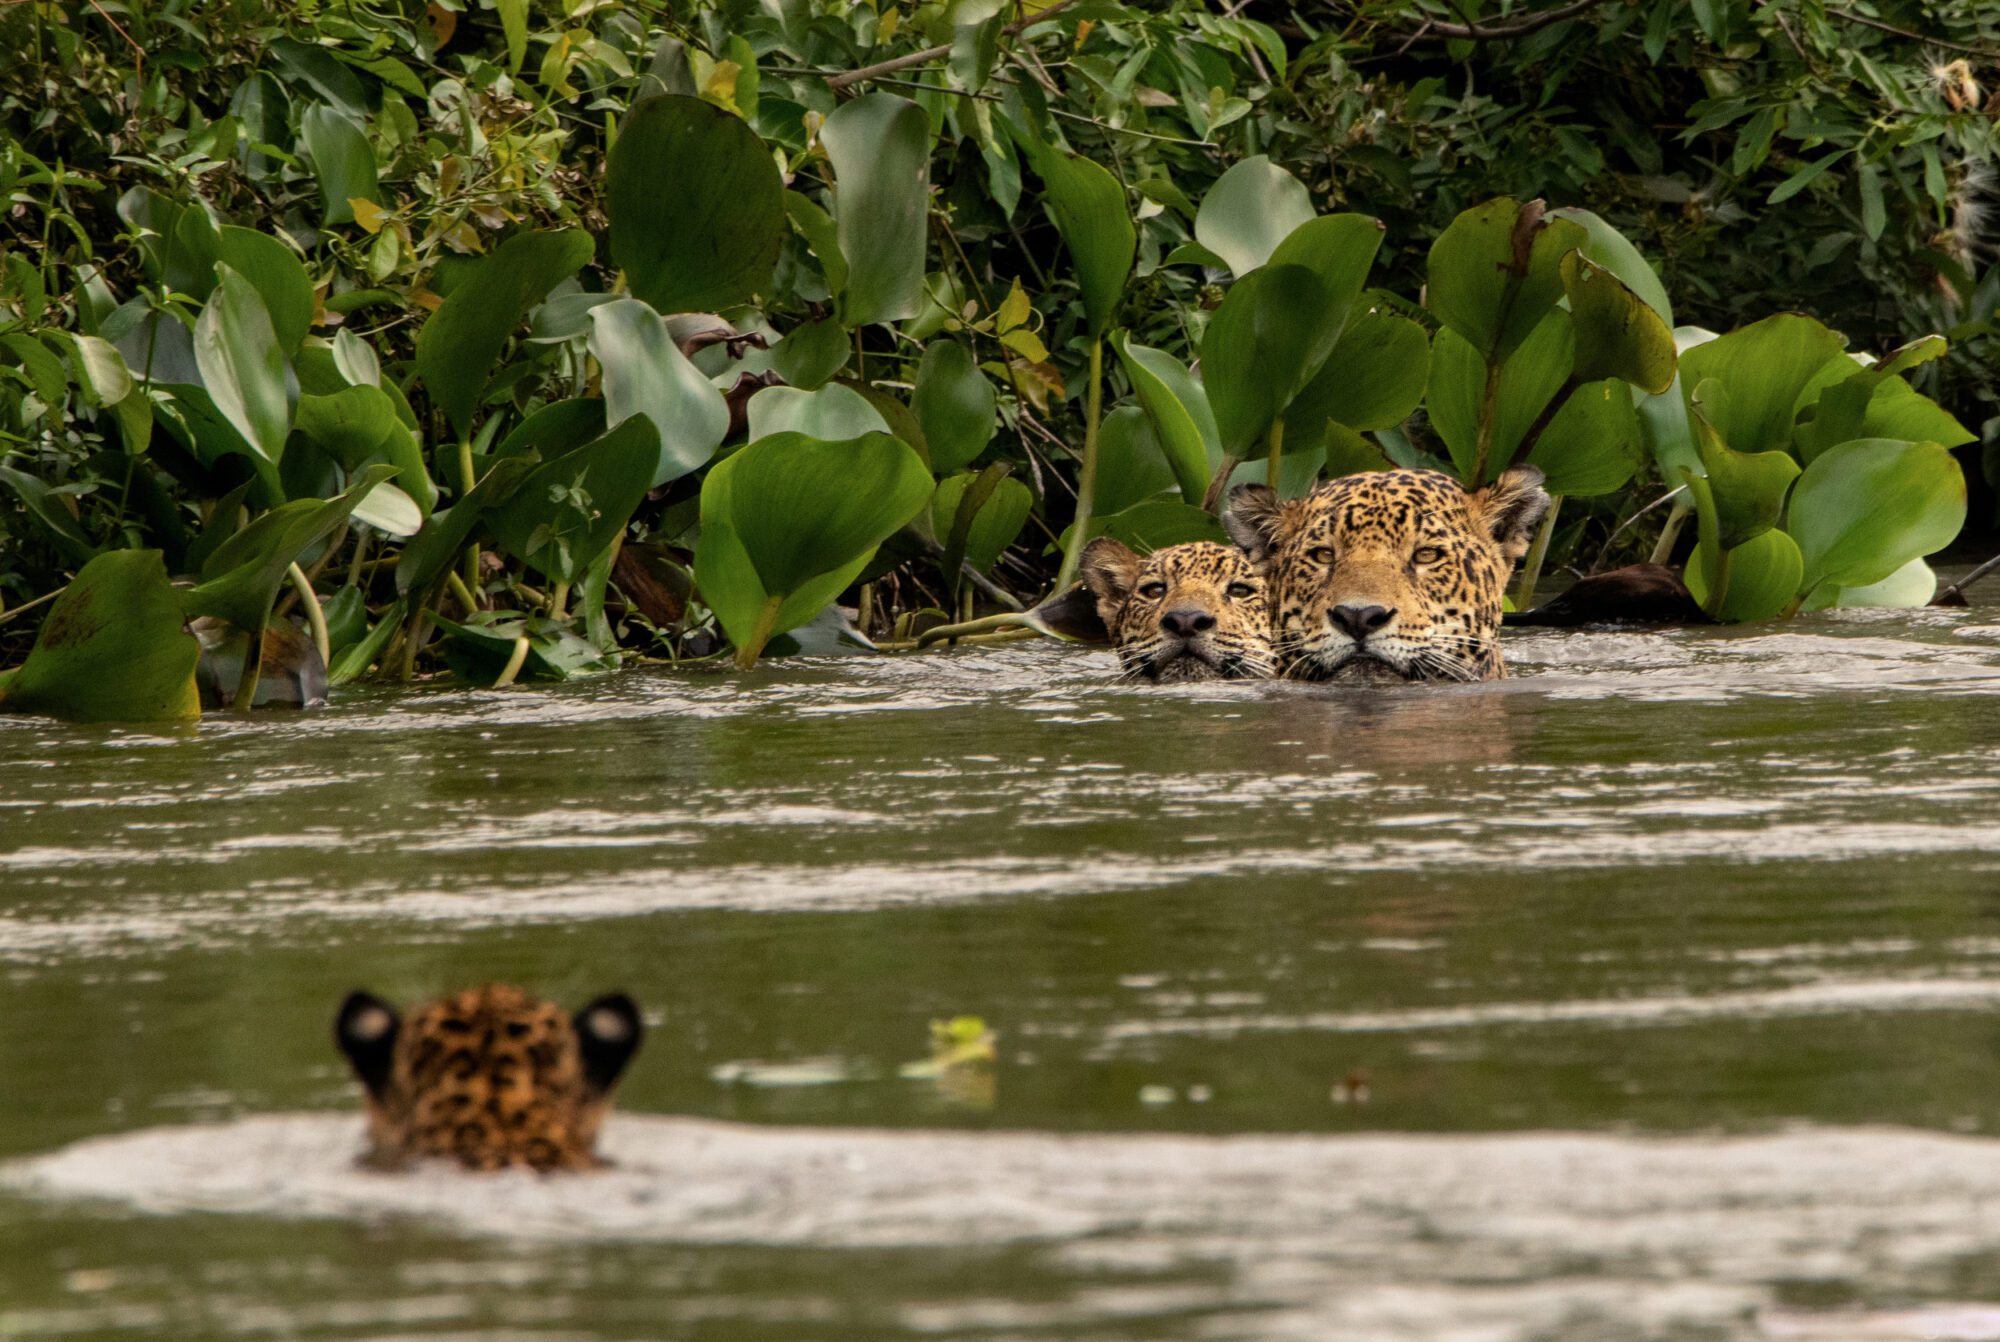 3 jaguars swim in water, with vegetation behind them